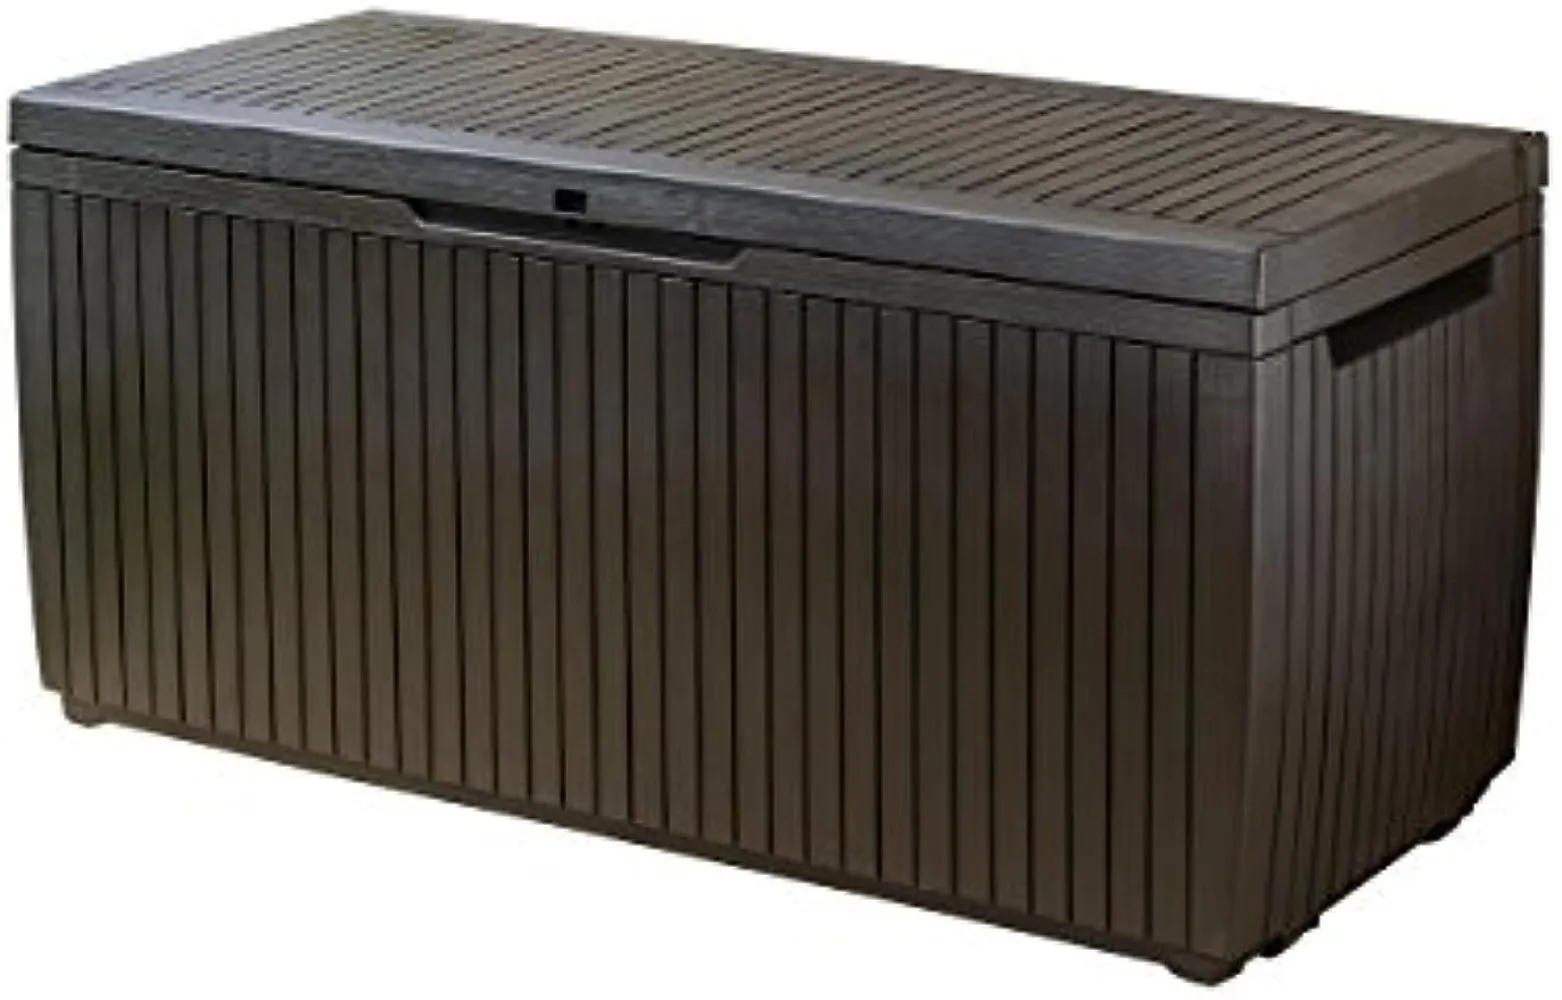 

Keter Springwood 80 Gallon Resin Outdoor Storage Box for Patio Furniture Cushions,Pool Toys, and Garden Tools with Handles,Brown